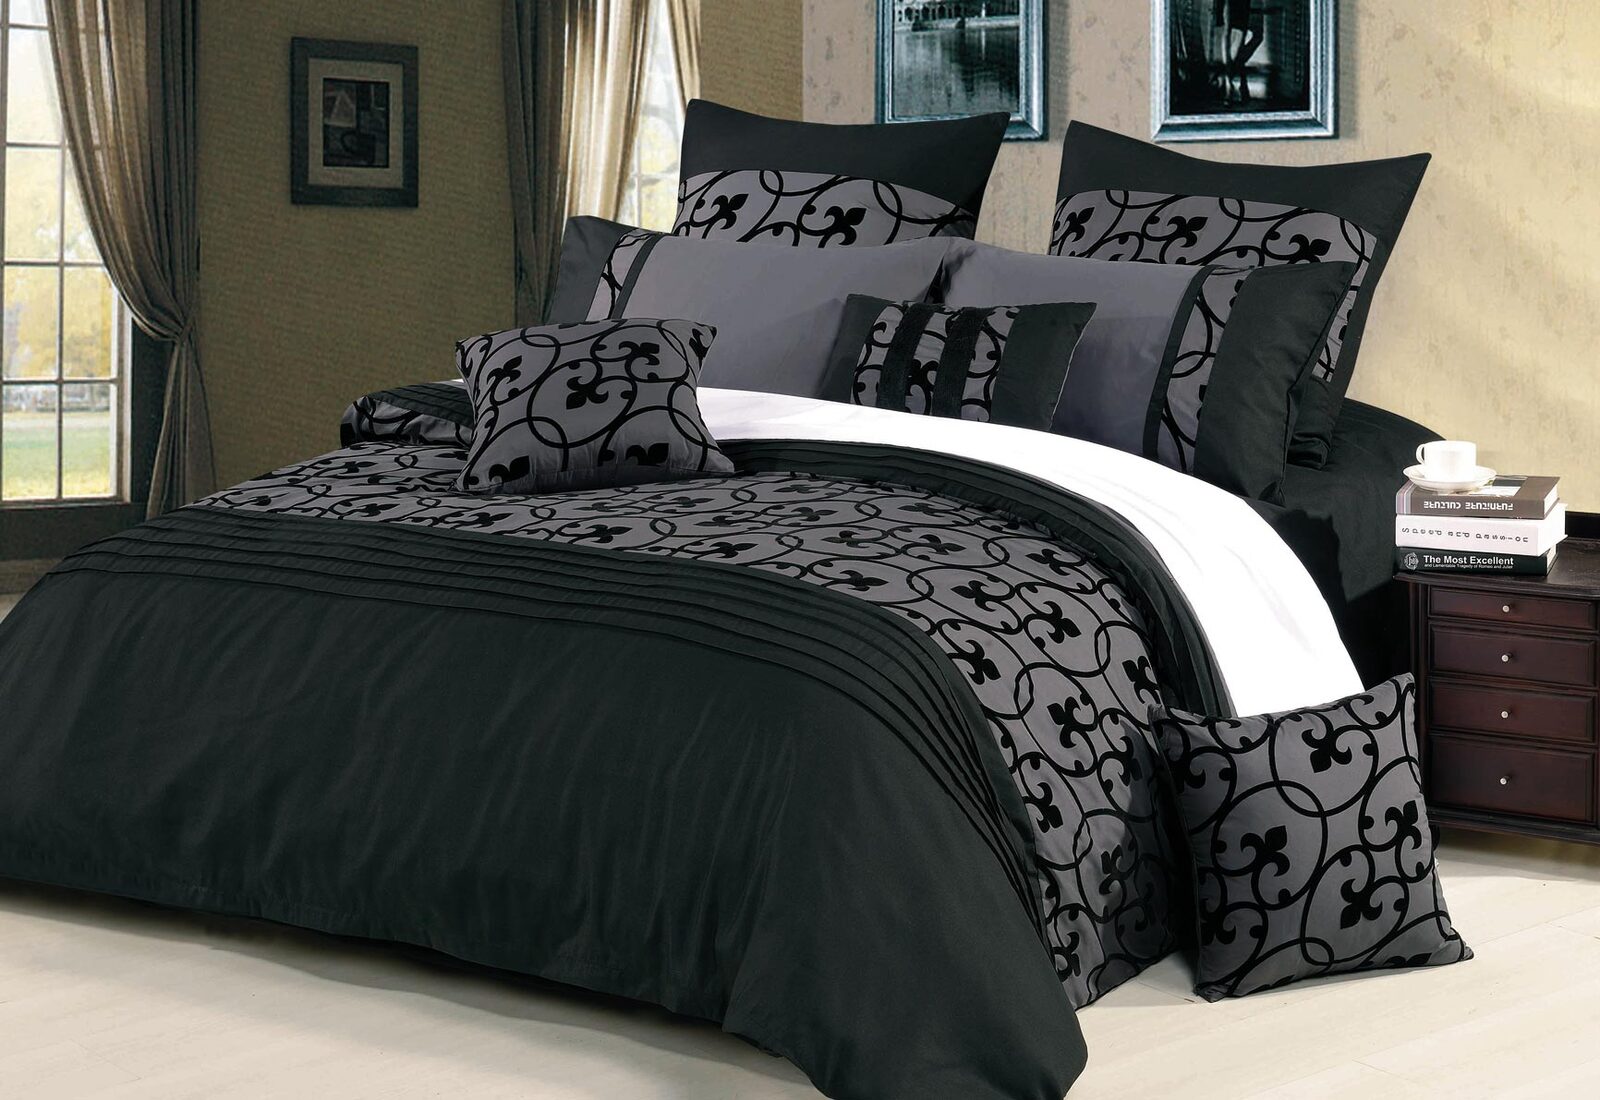 Lyde Charcoal Black Quilt Cover Set By Luxton Warehouse Sale At